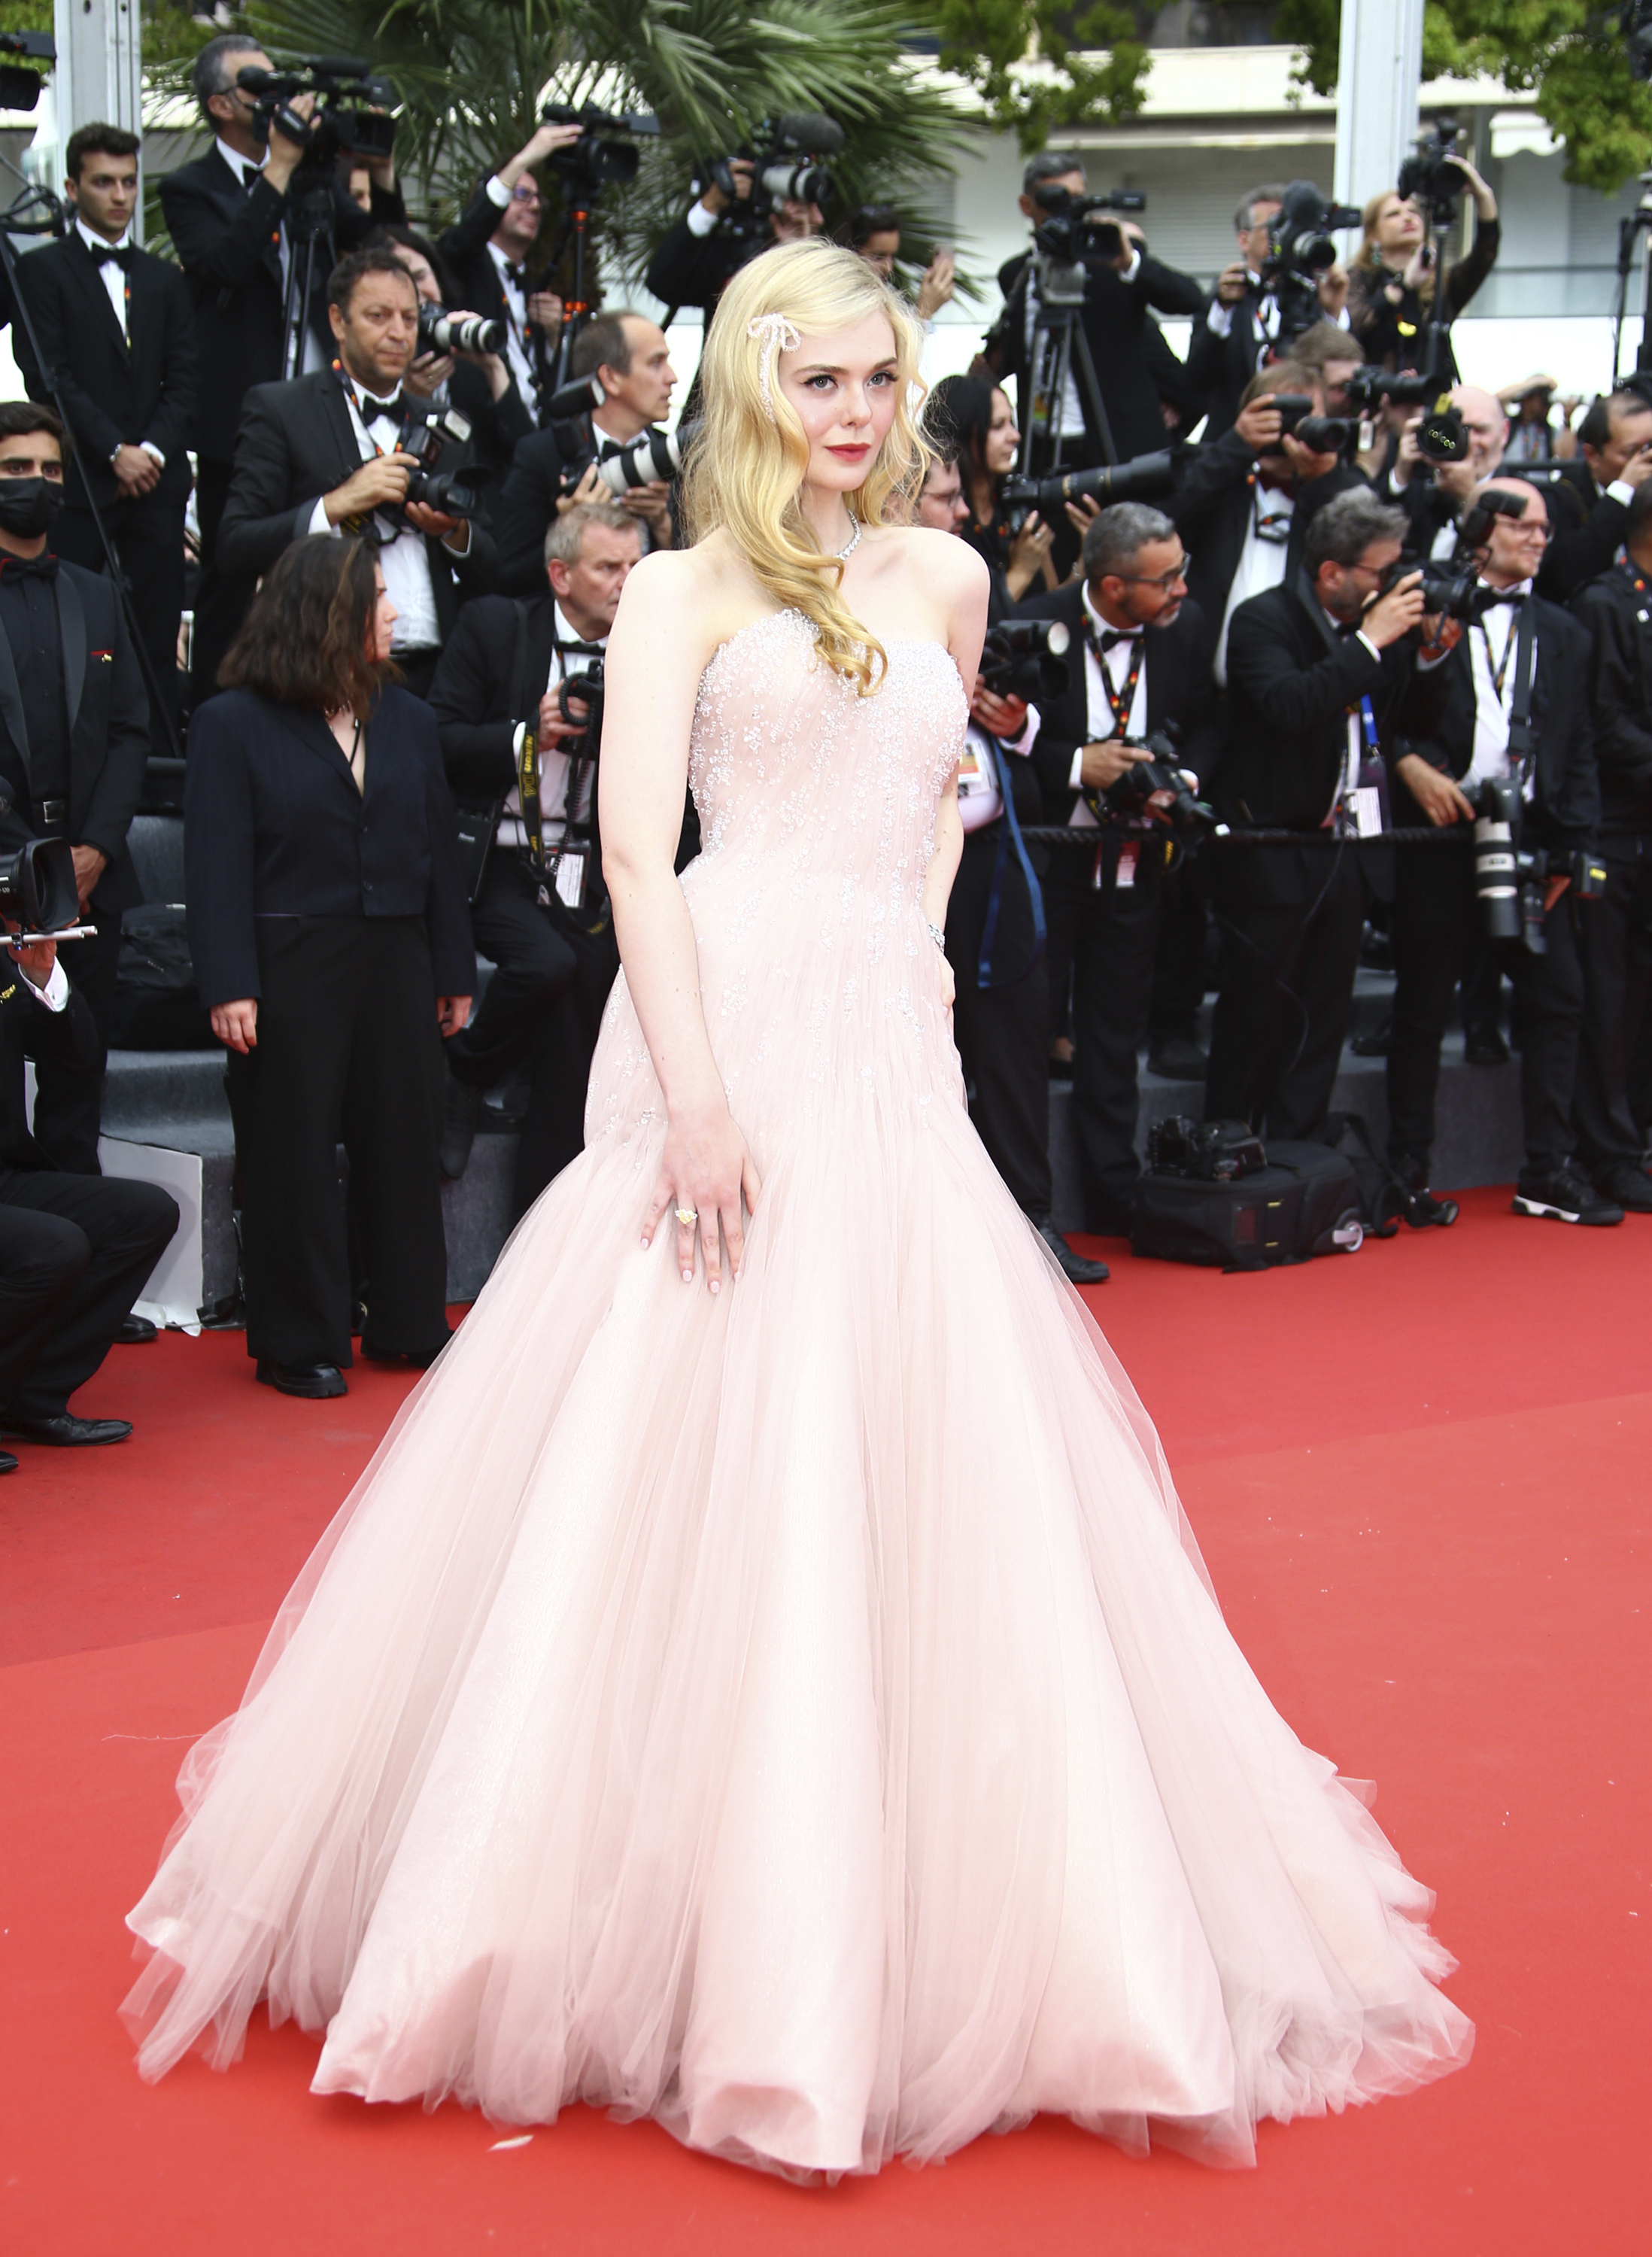 Elle Fanning wearing a strapless pale pink gown with a tulle skirt. 